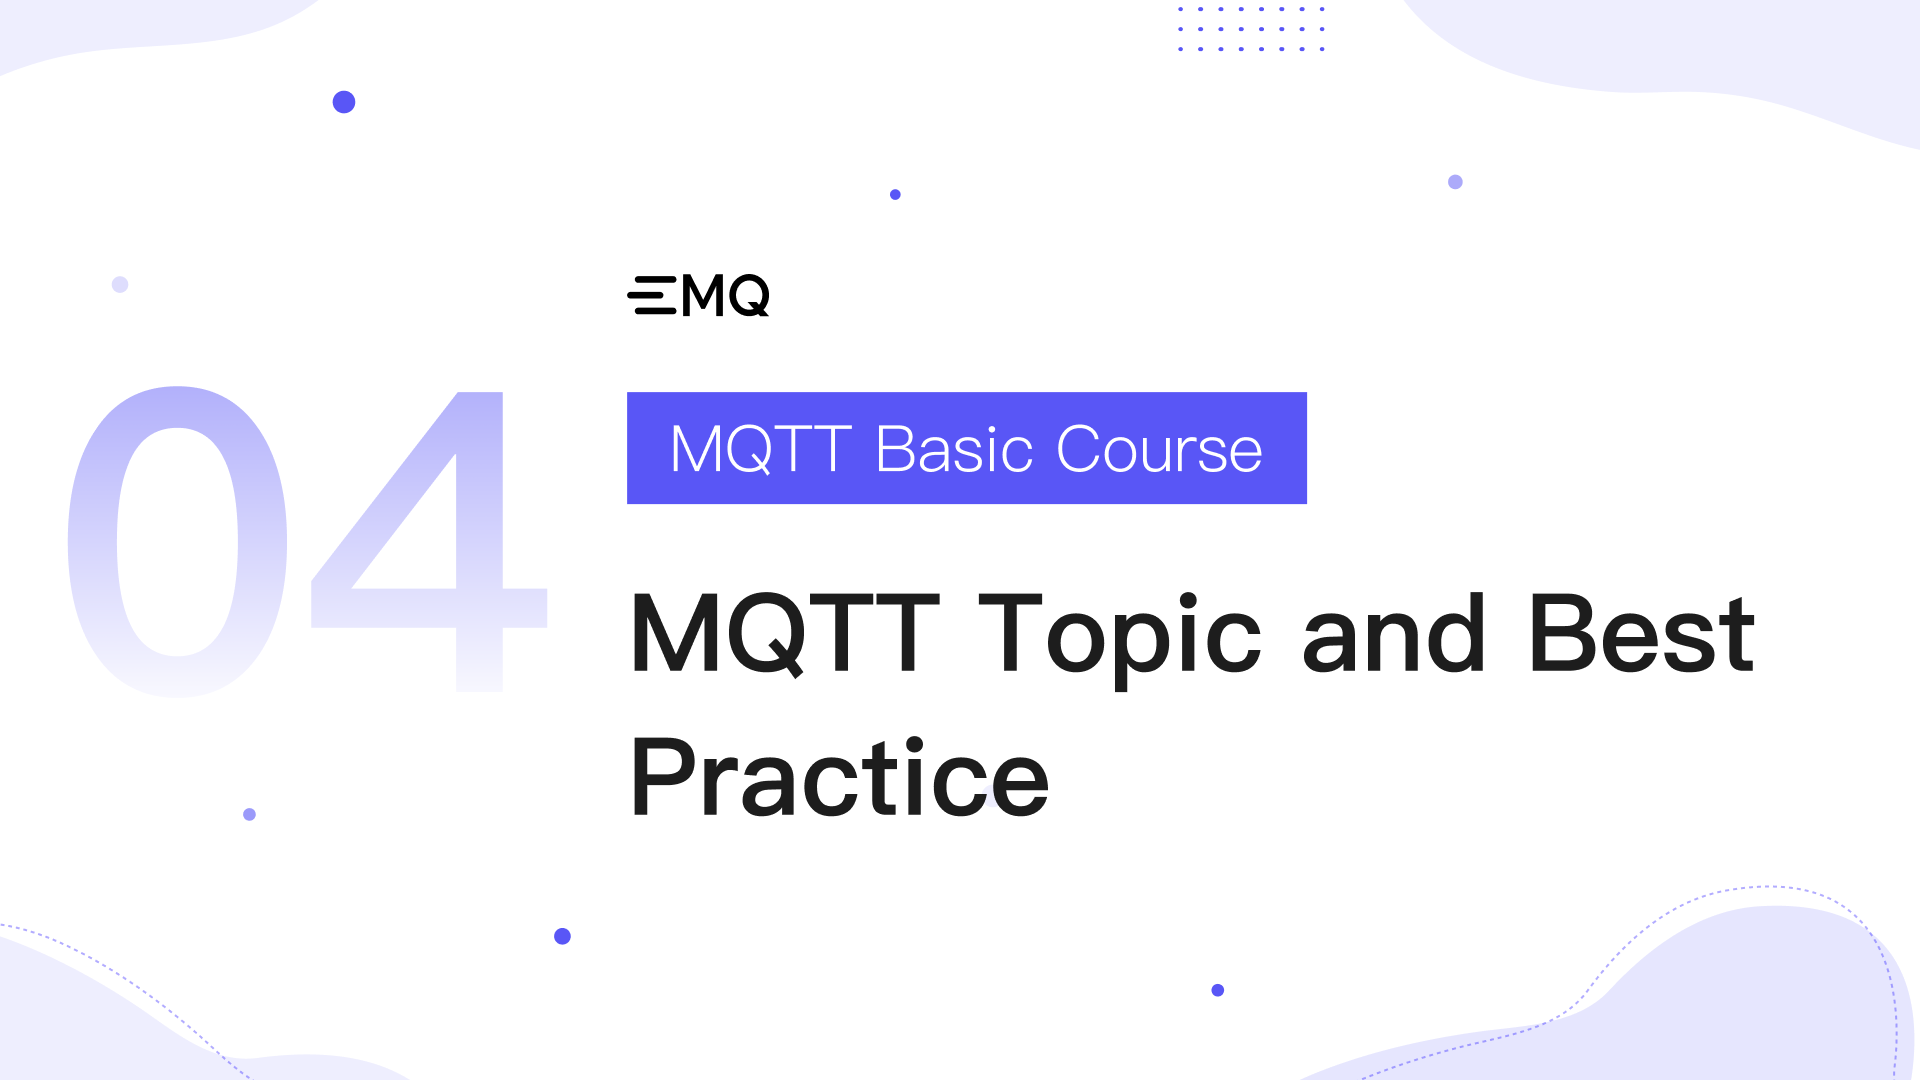 Lesson 4: MQTT Topic and Best Practice - MQTT Basic Course